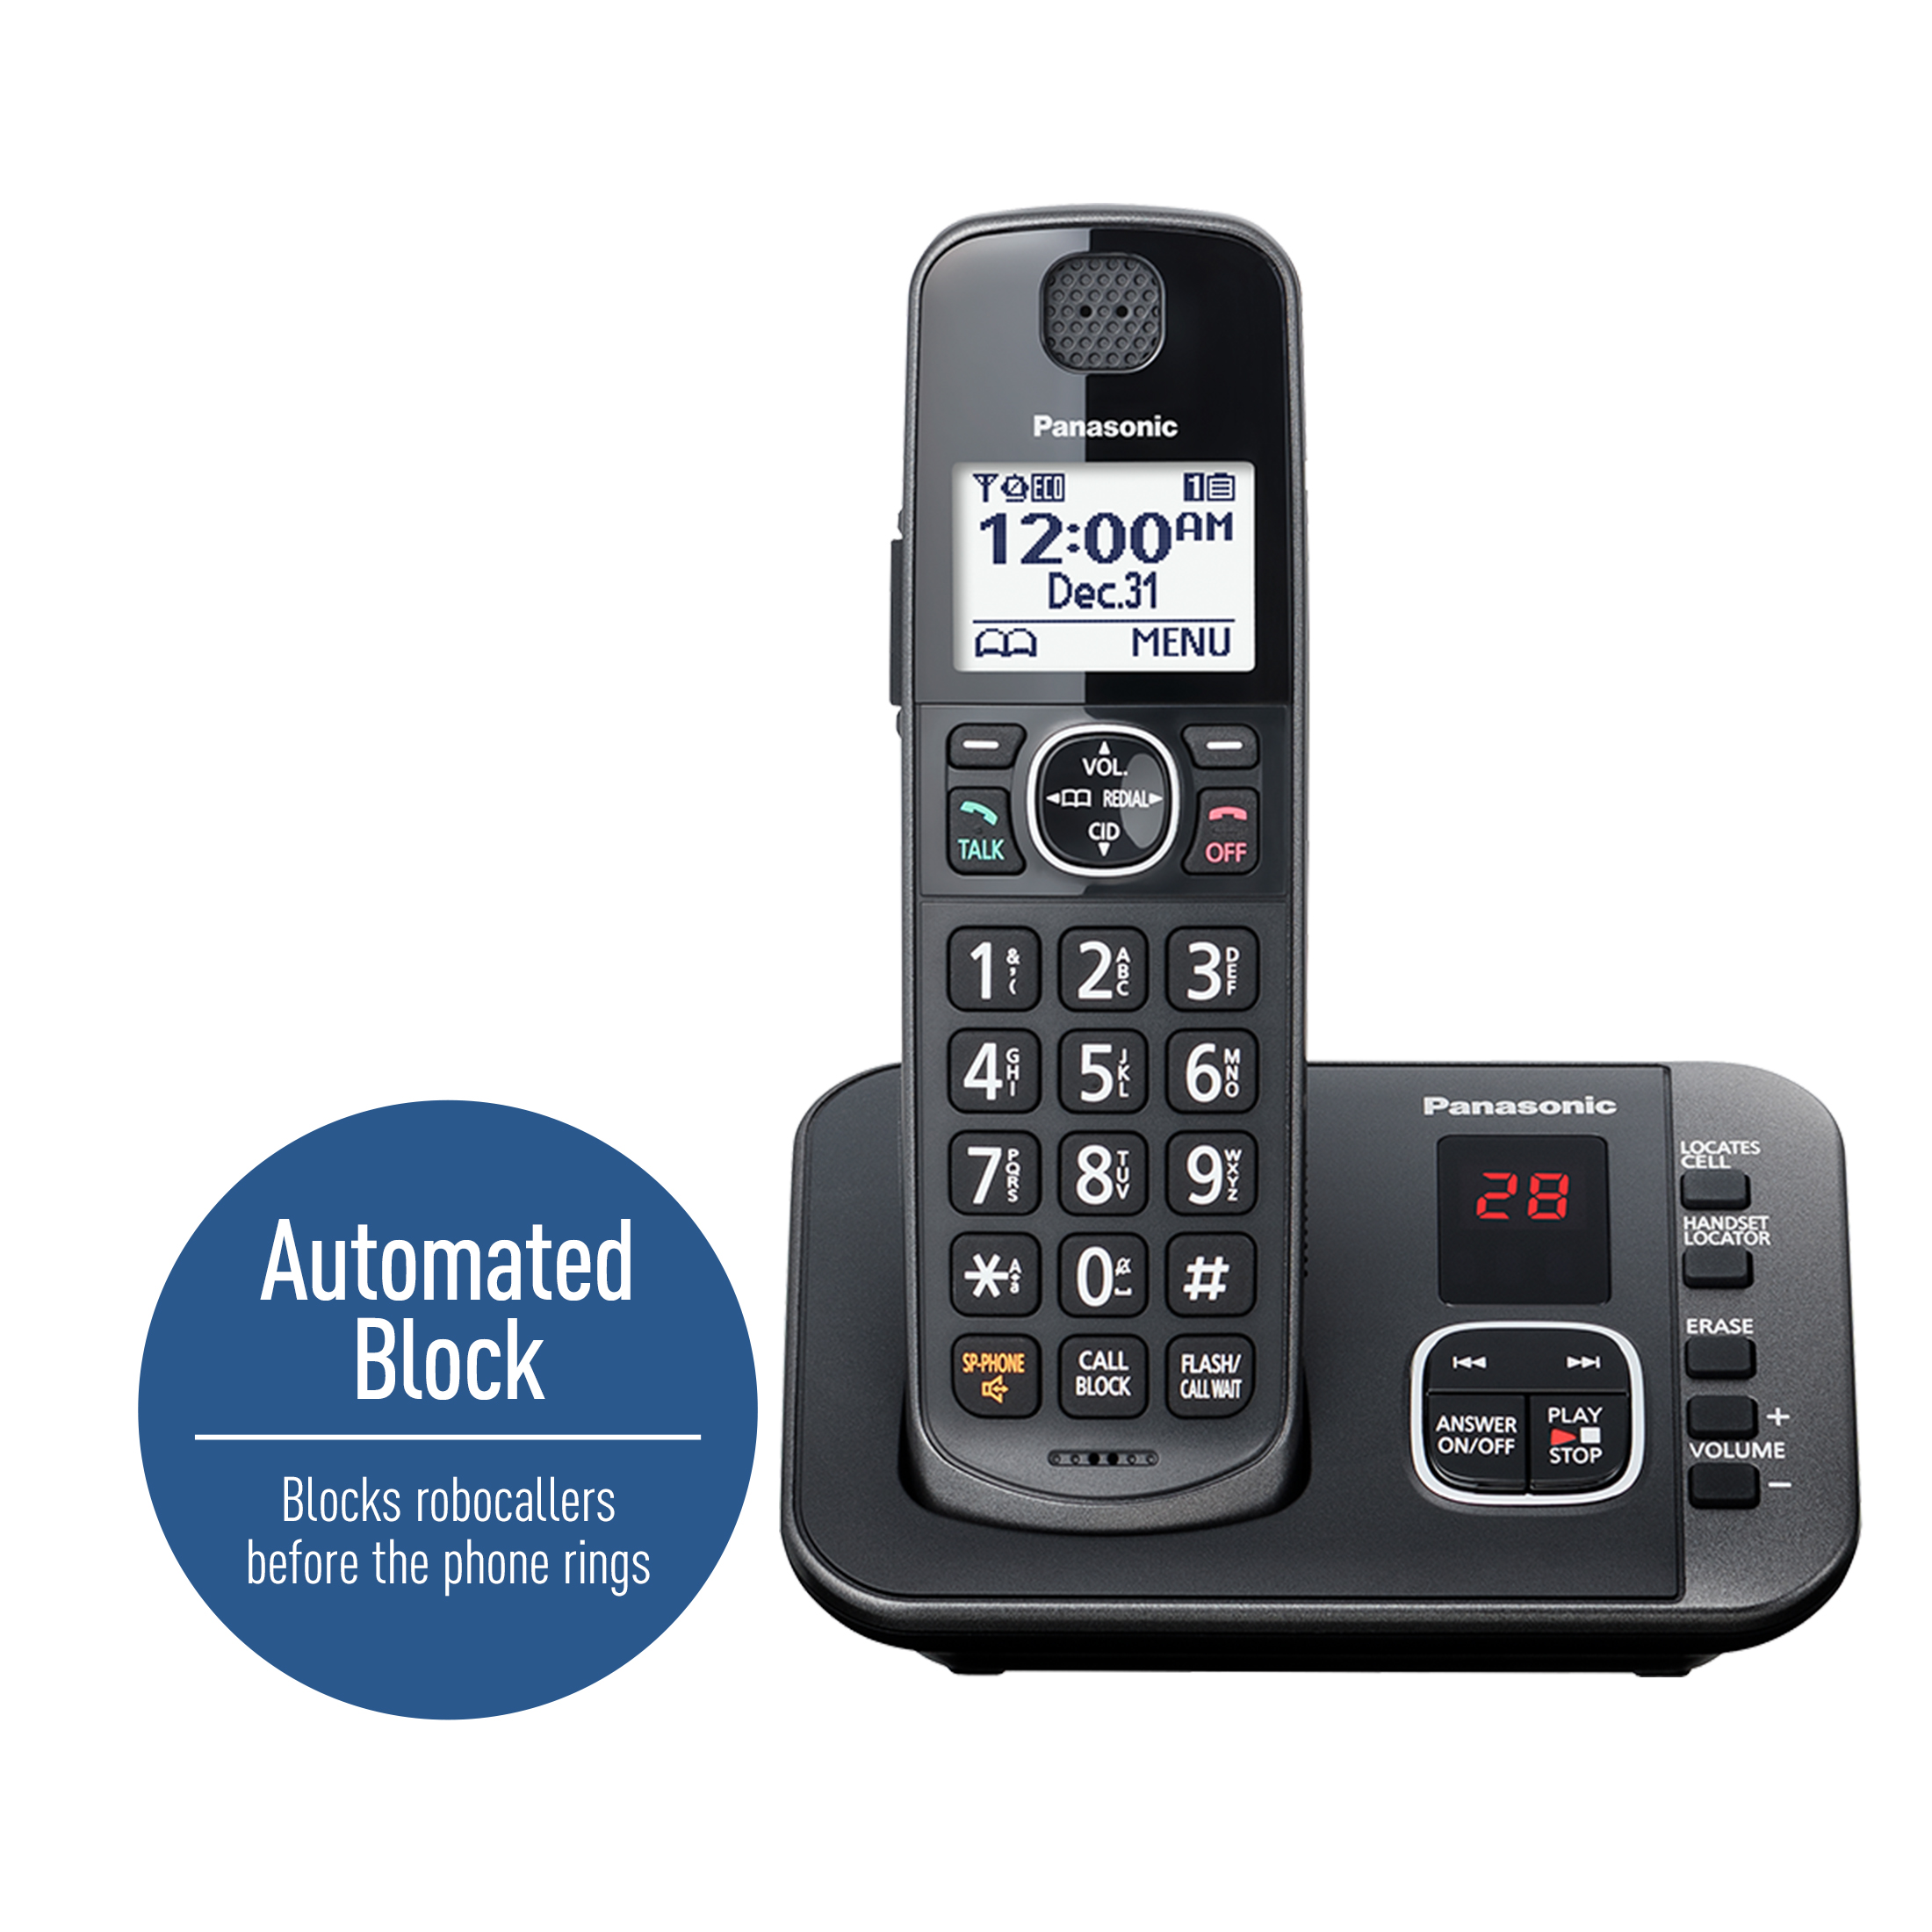 Panasonic 3-Handset Expandable Cordless Phone System with Answering System - KX-TG3833M - image 3 of 9